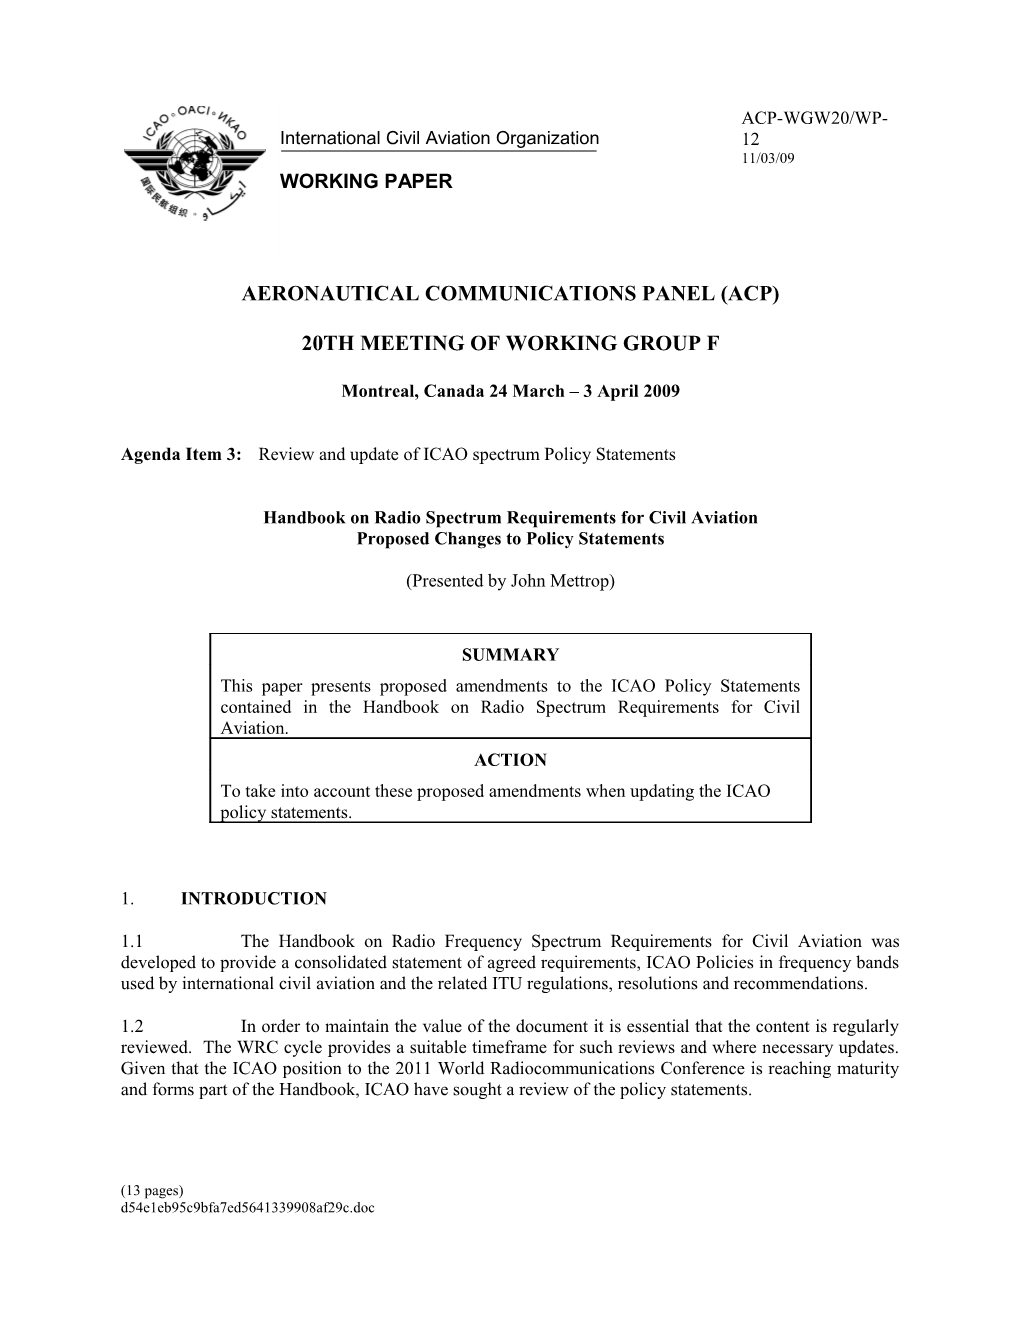 Handbook on Radio Spectrum Requirements for Civil Aviation Proposed Changes to Policy Statements